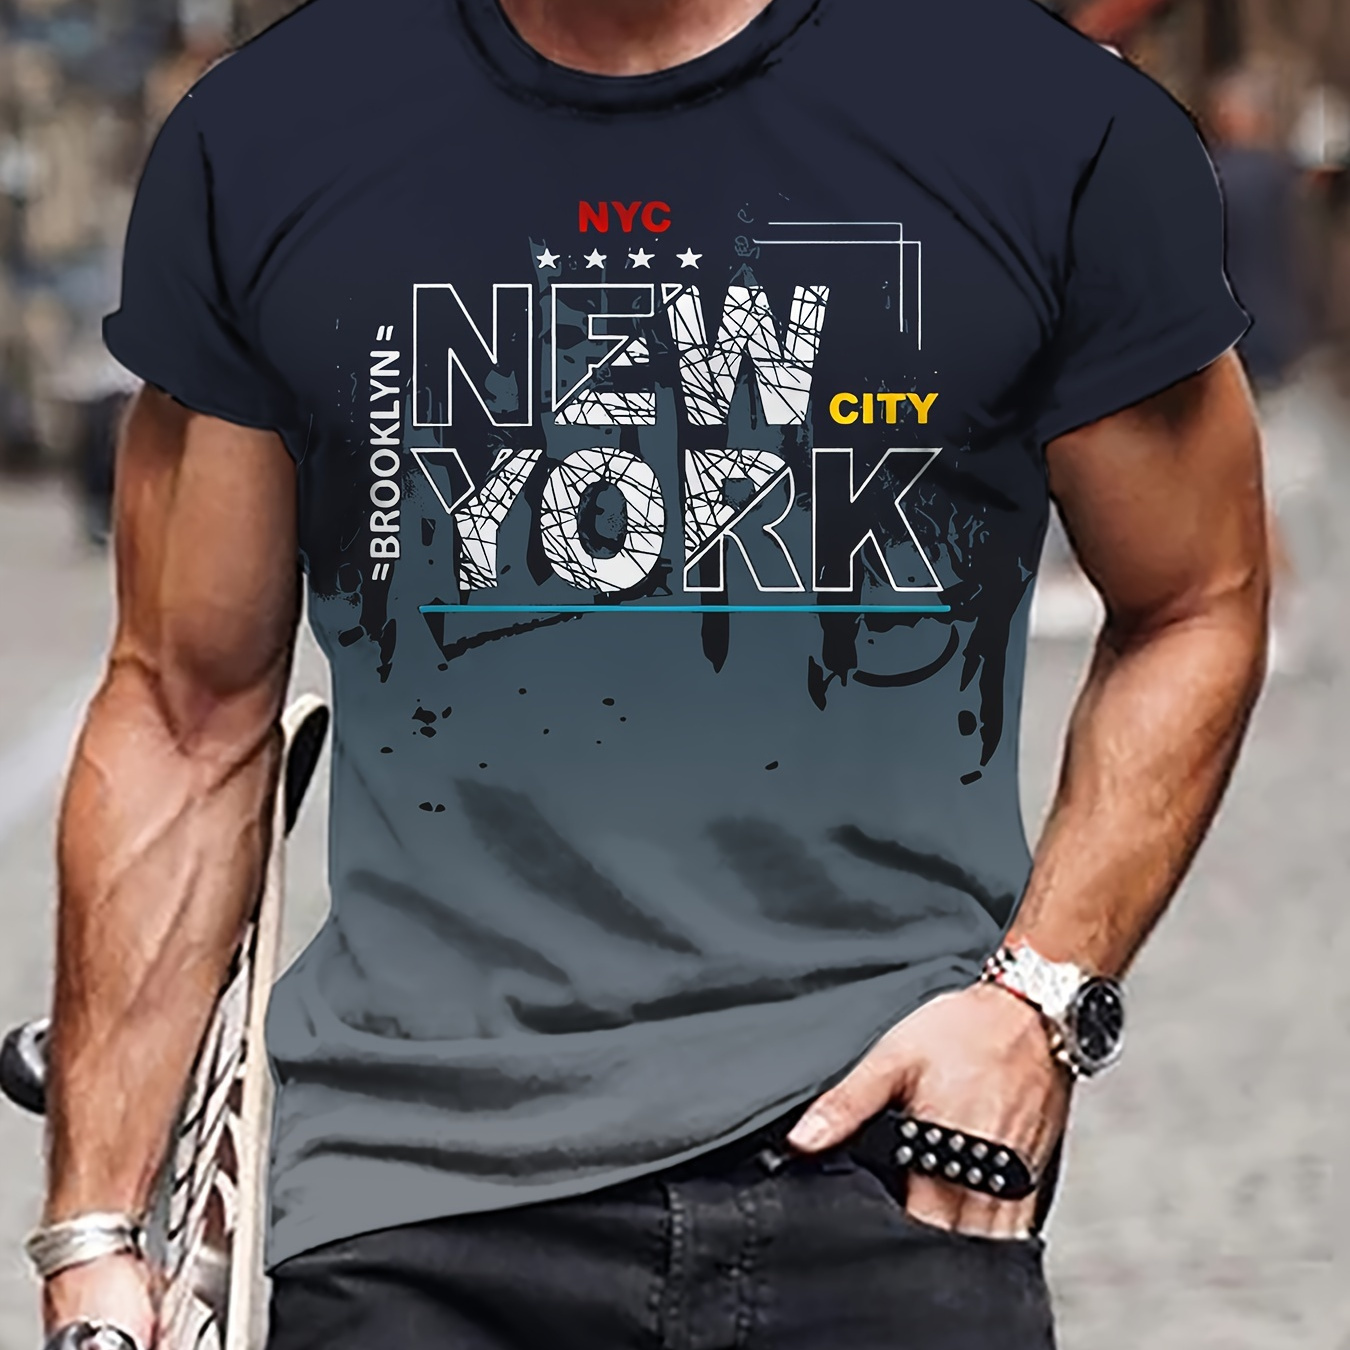 

Men's New York Graphic Print T-shirt, Casual Short Sleeve Crew Neck Tee, Men's Clothing For Outdoor